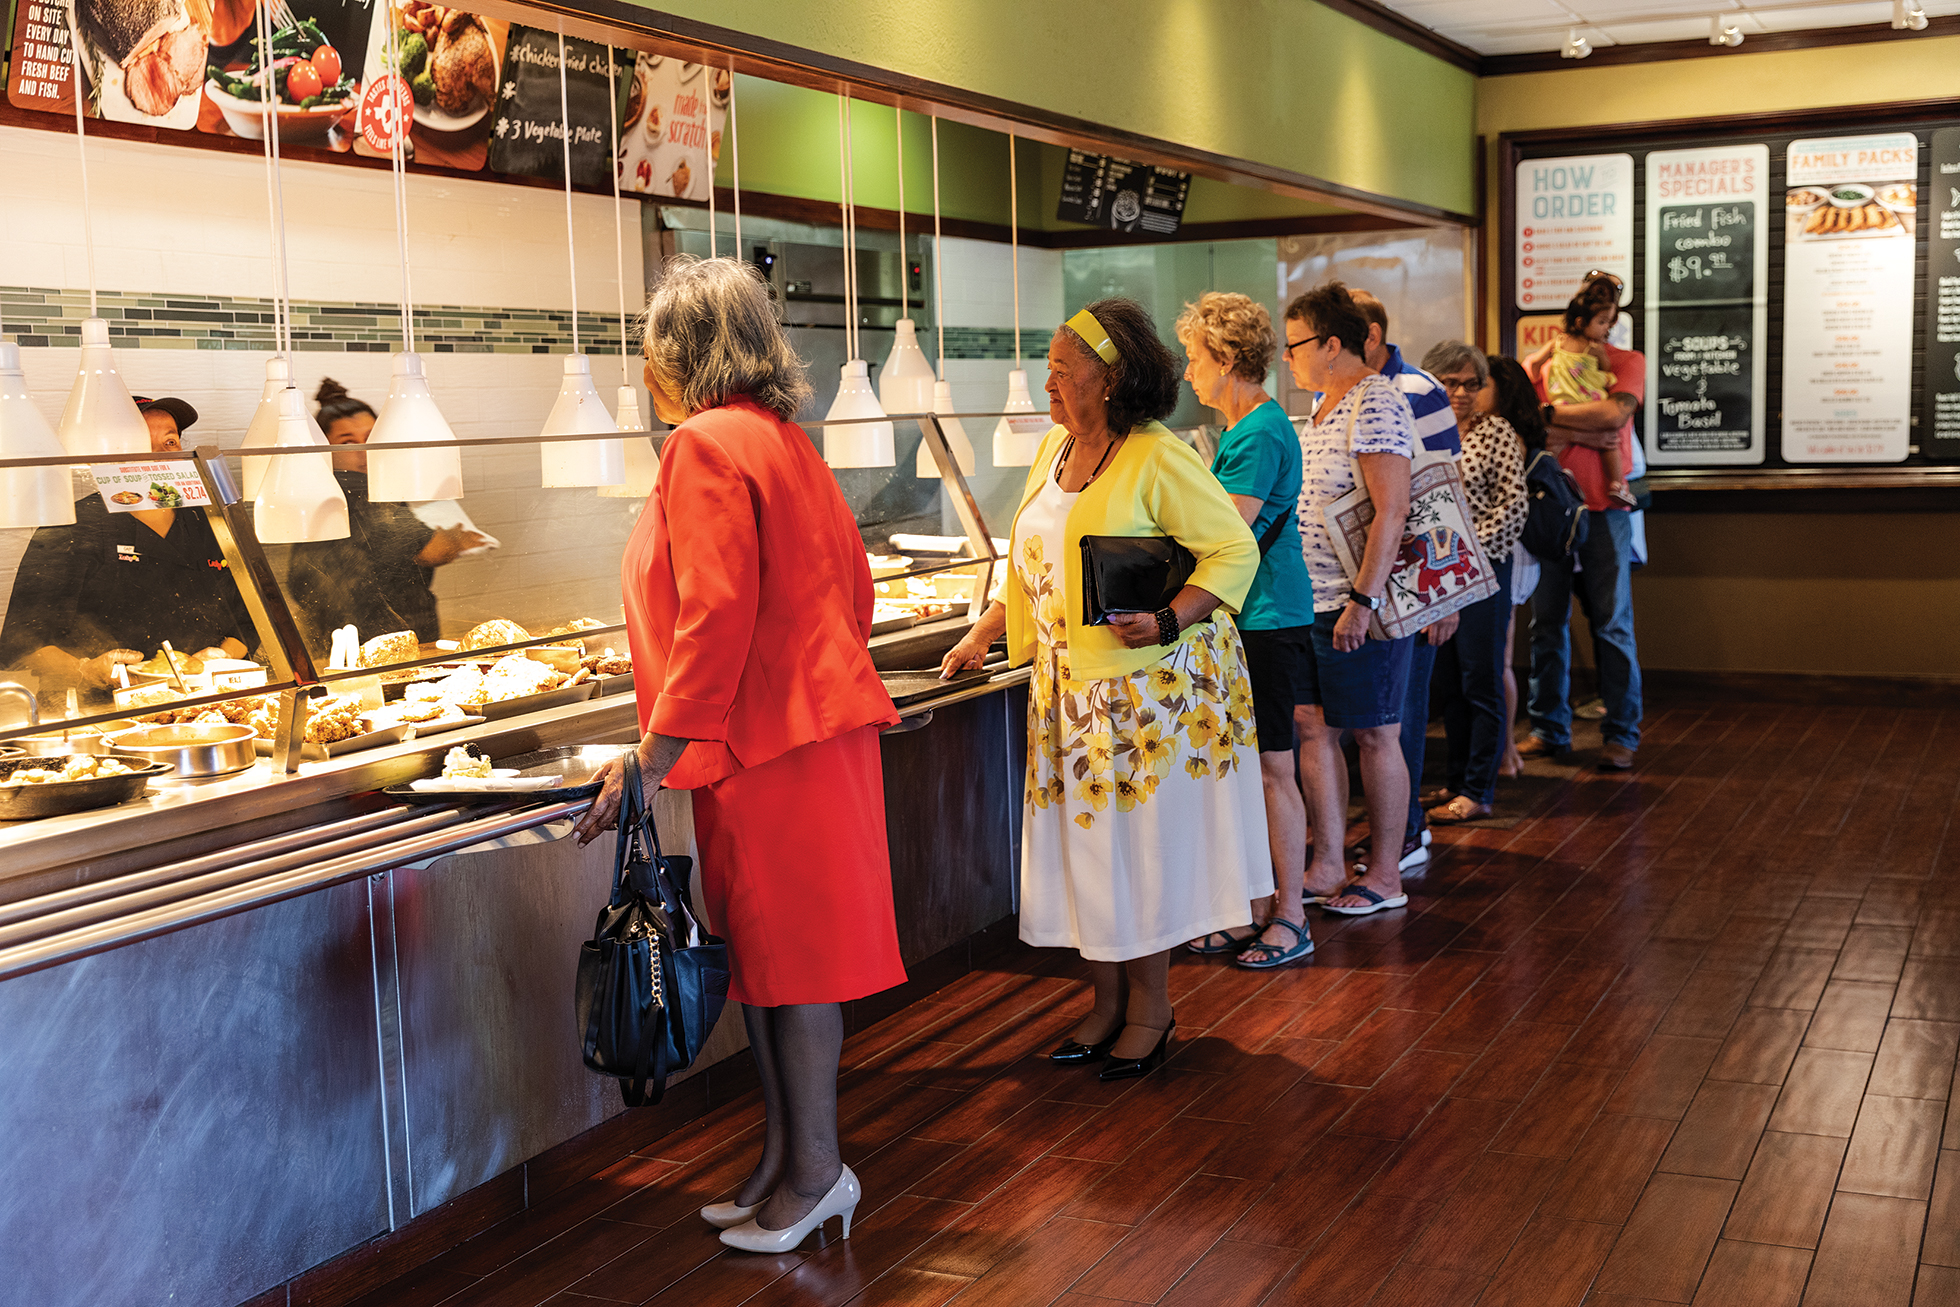 “It is still very much a melting pot,” says Carol Dawson, co-author of House of Plenty: The Rise, Fall, and Revival of Luby’s Cafeterias. “I do still observe that broad slice of demography when I go to Luby’s.”